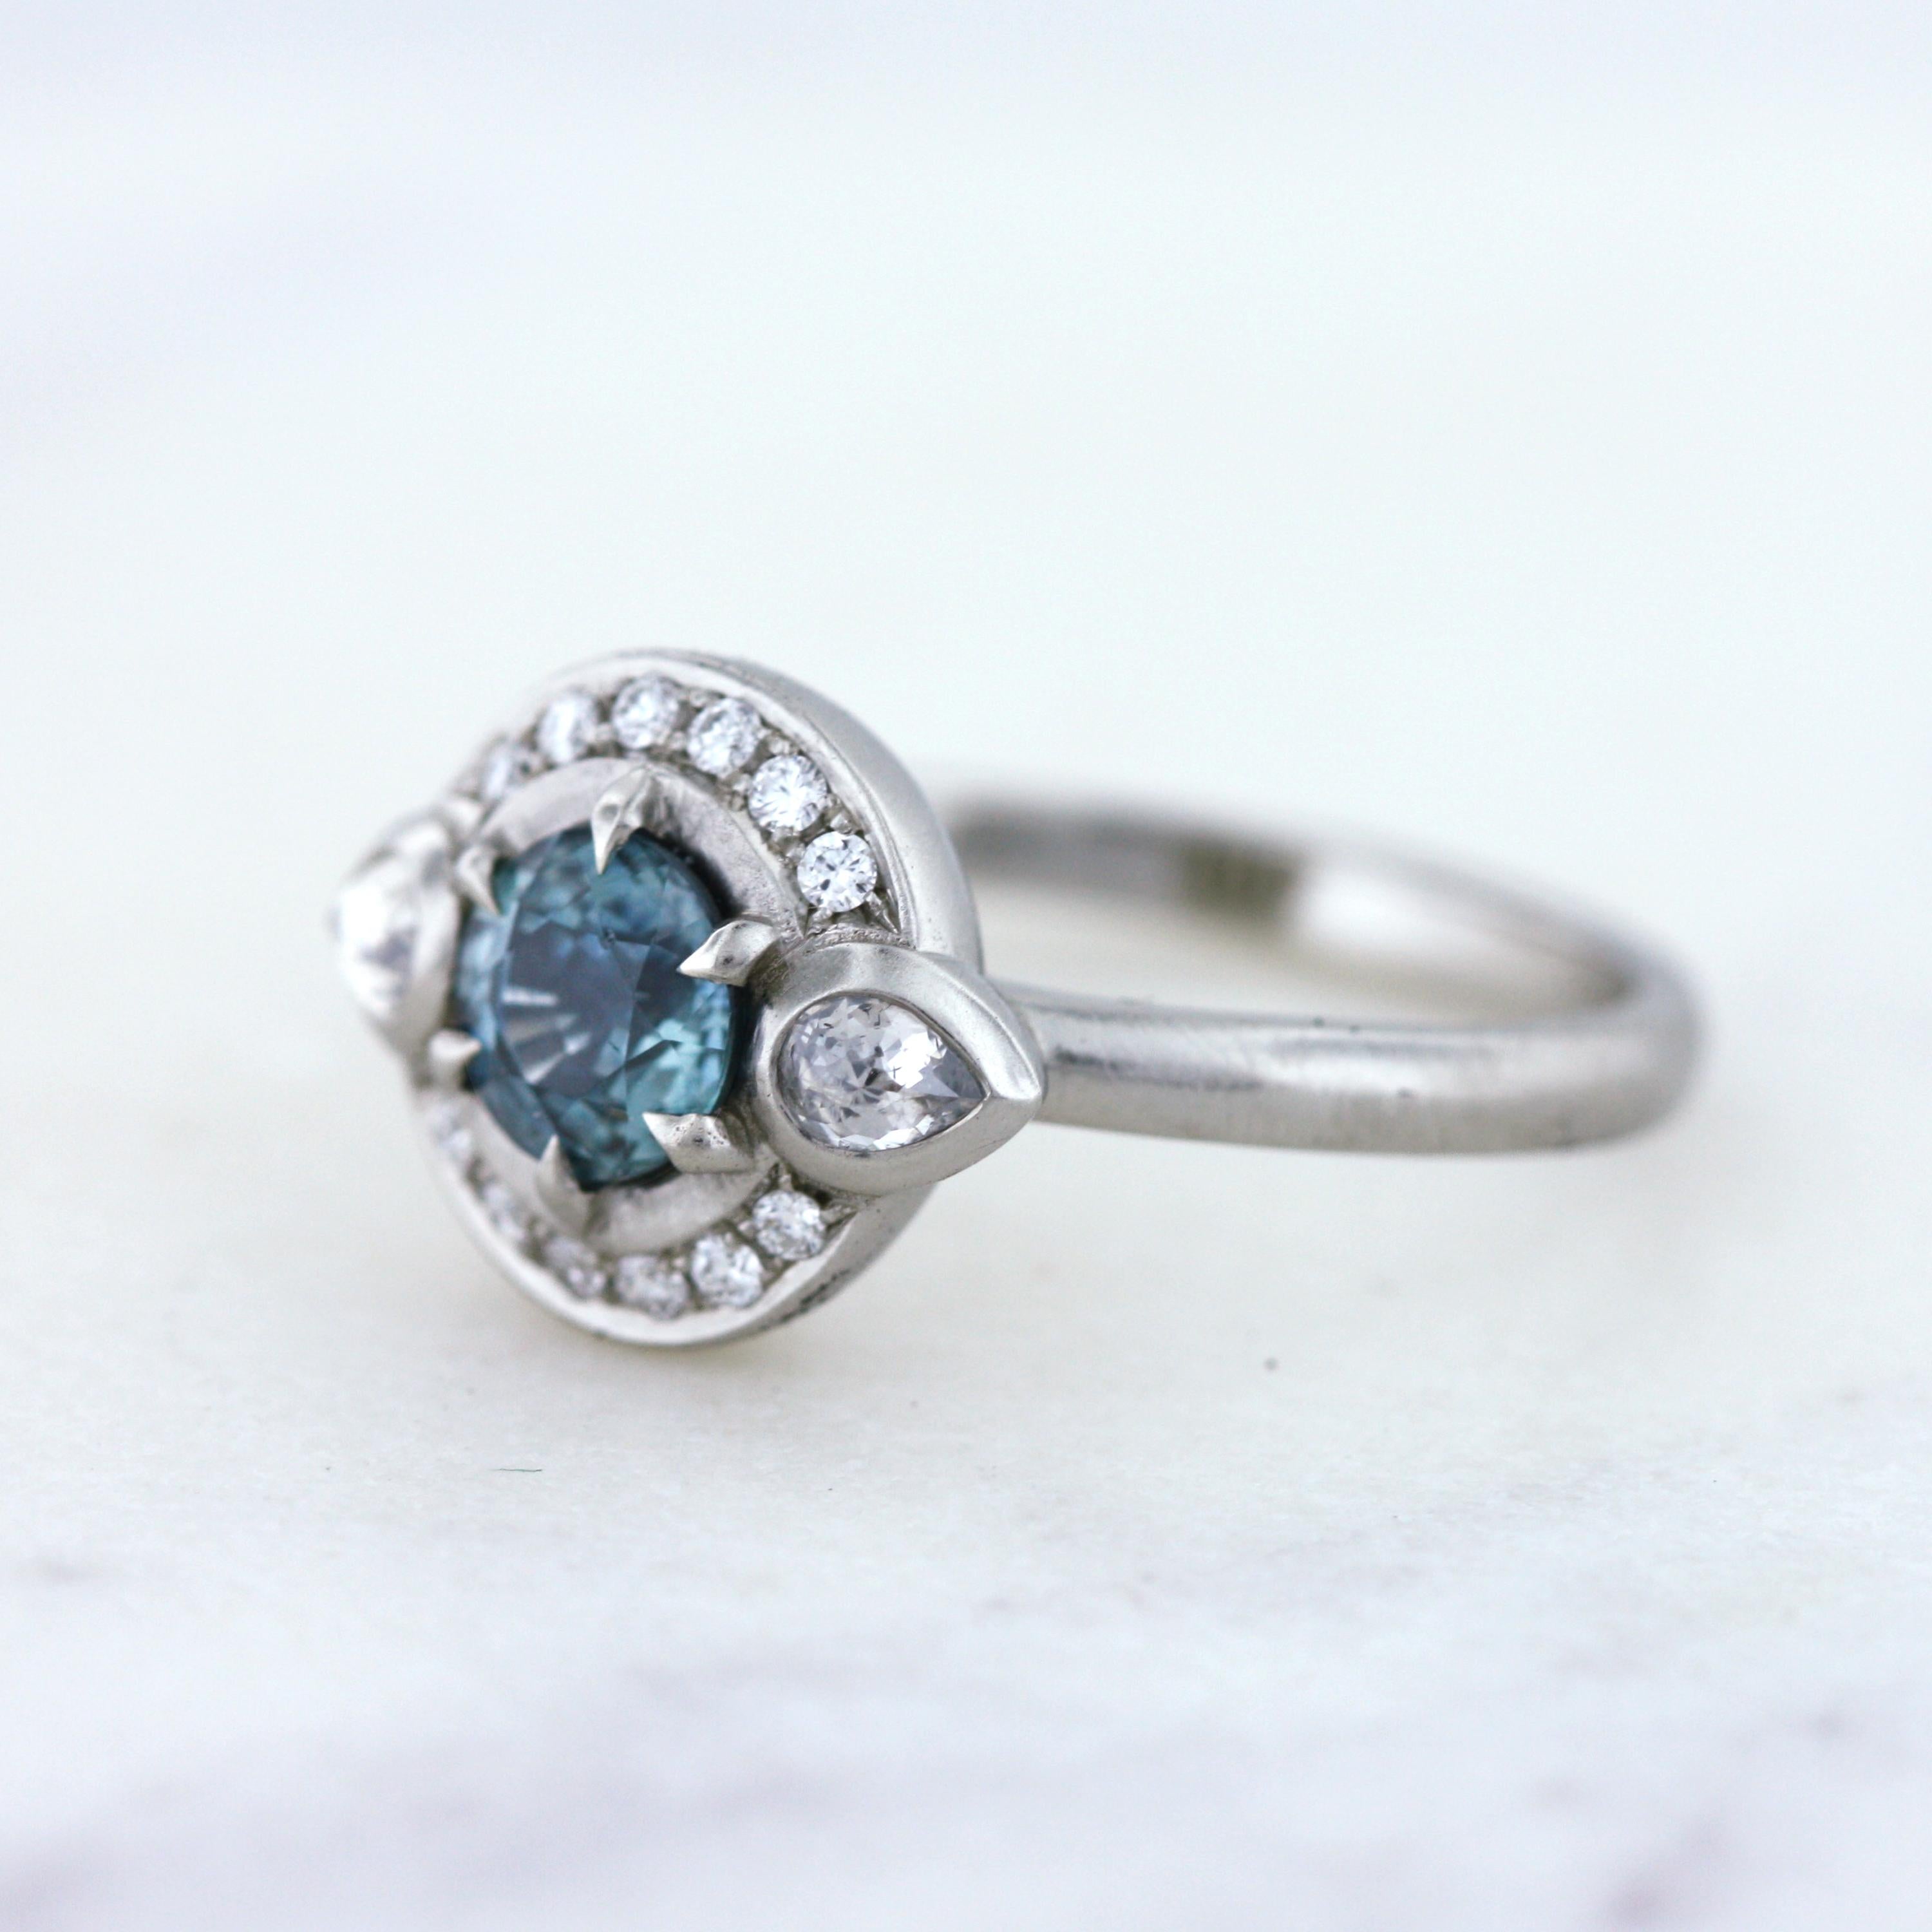 Modern Art Deco inspired ring with a .77 carat teal Montana sapphire and rose cut pear Canadian accent diamonds. All set in 100% recycled 14K white gold. The prefect ring for a American/Canadian couple.
 
- One of a kind
- Finger size 6.25
-